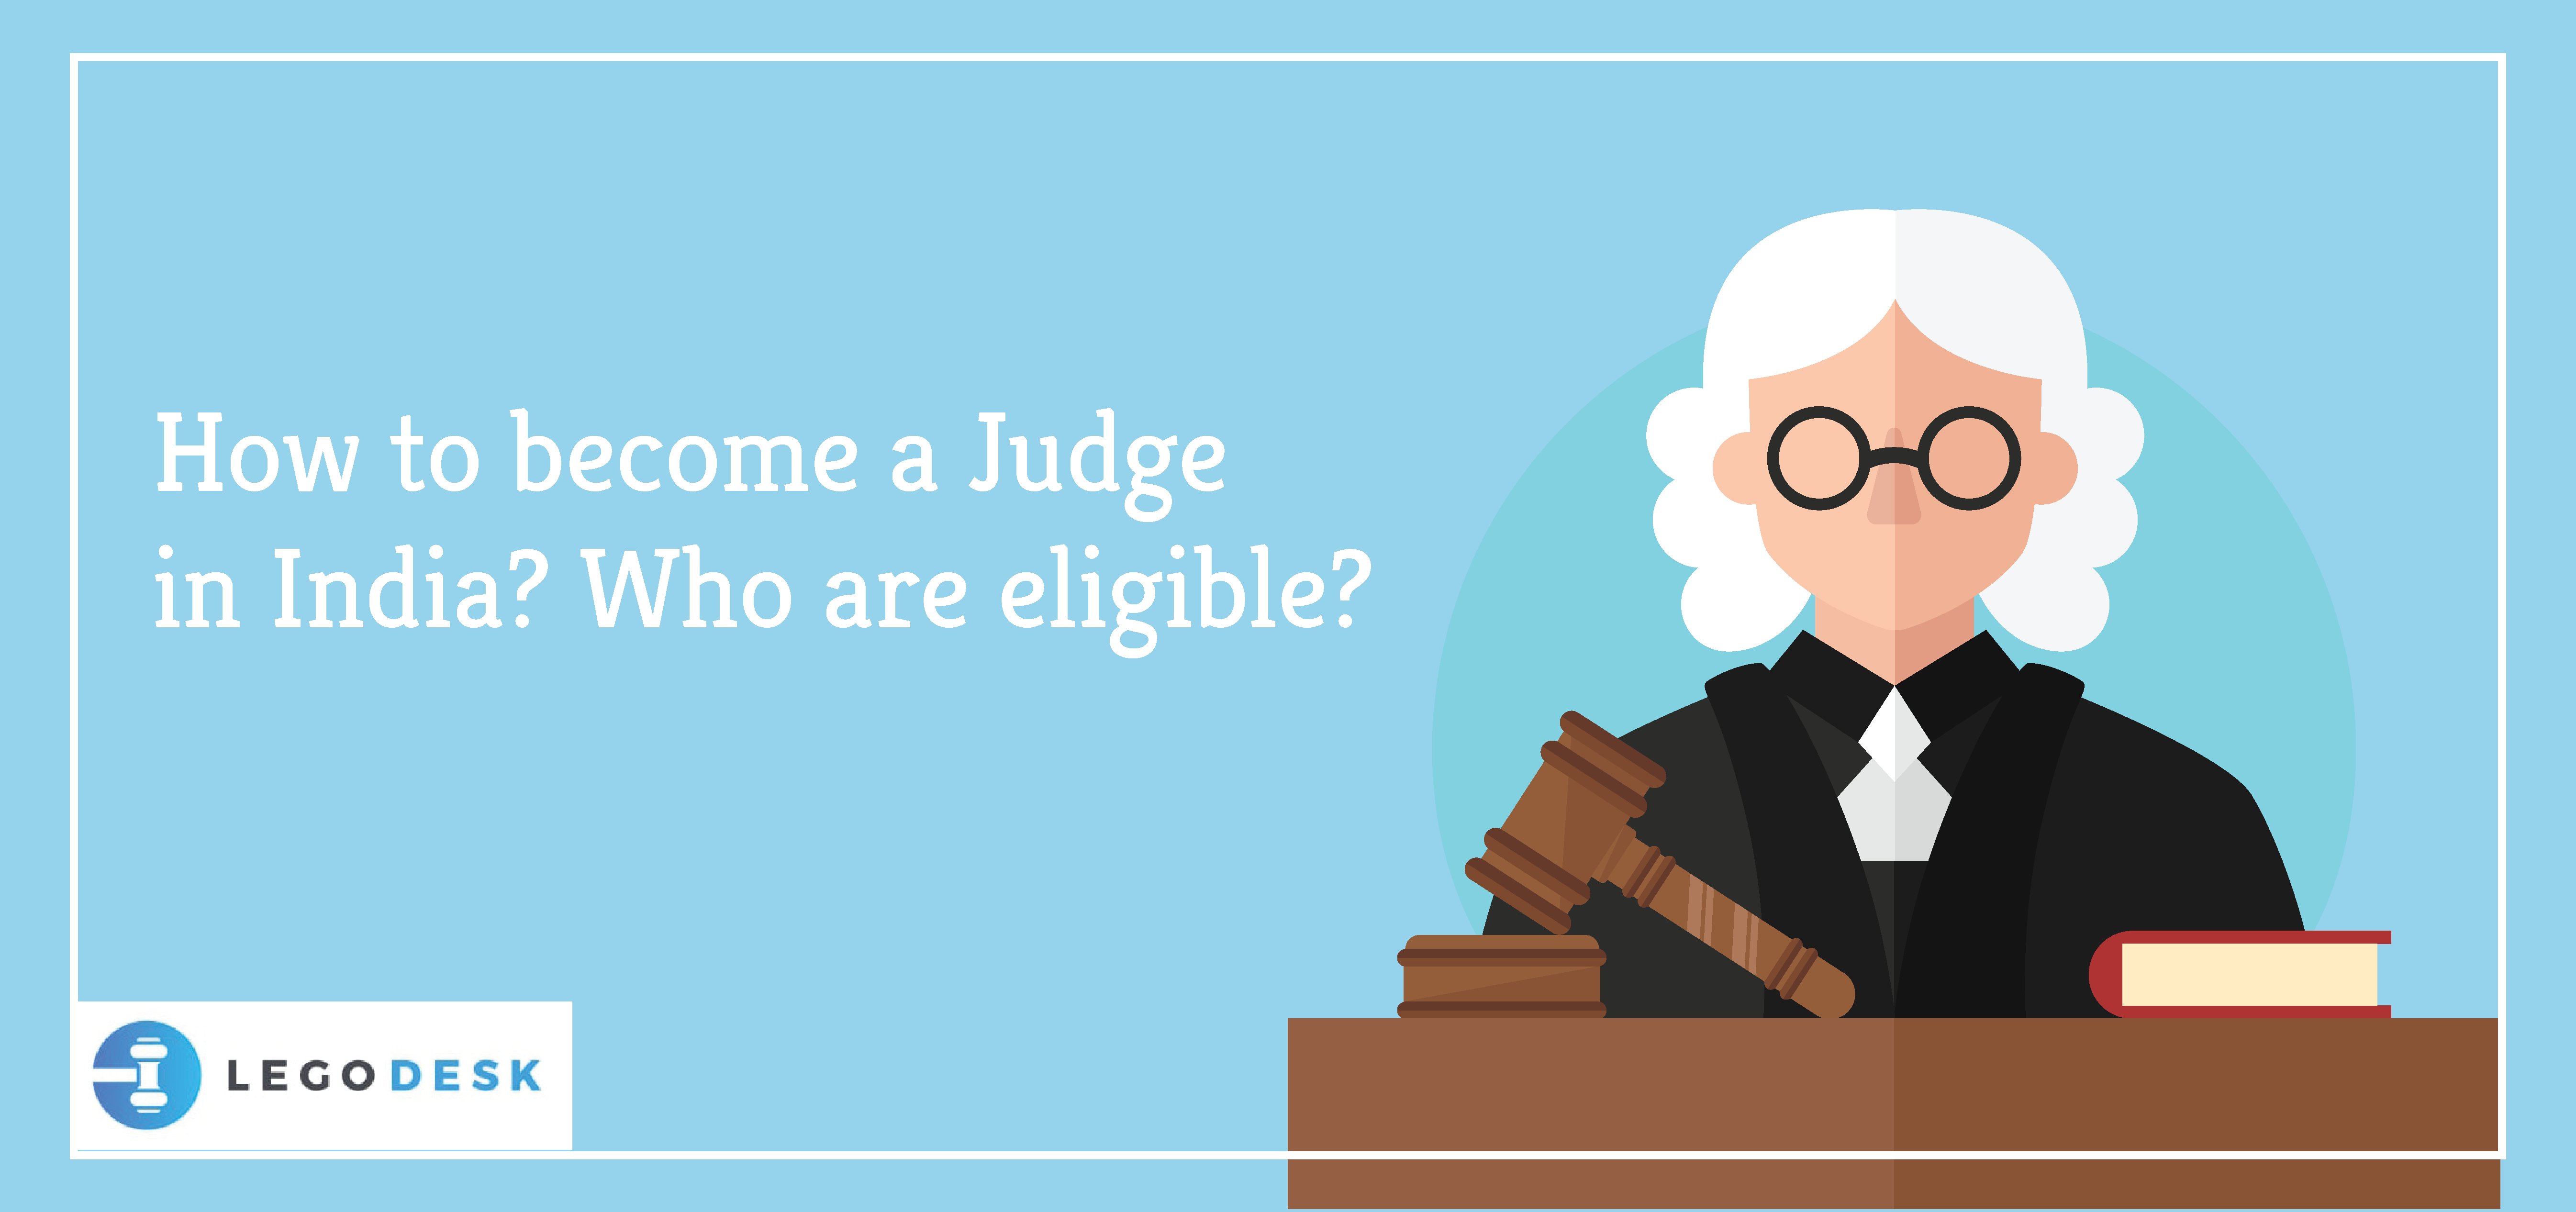 How to become a Judge in India? Who are eligible?